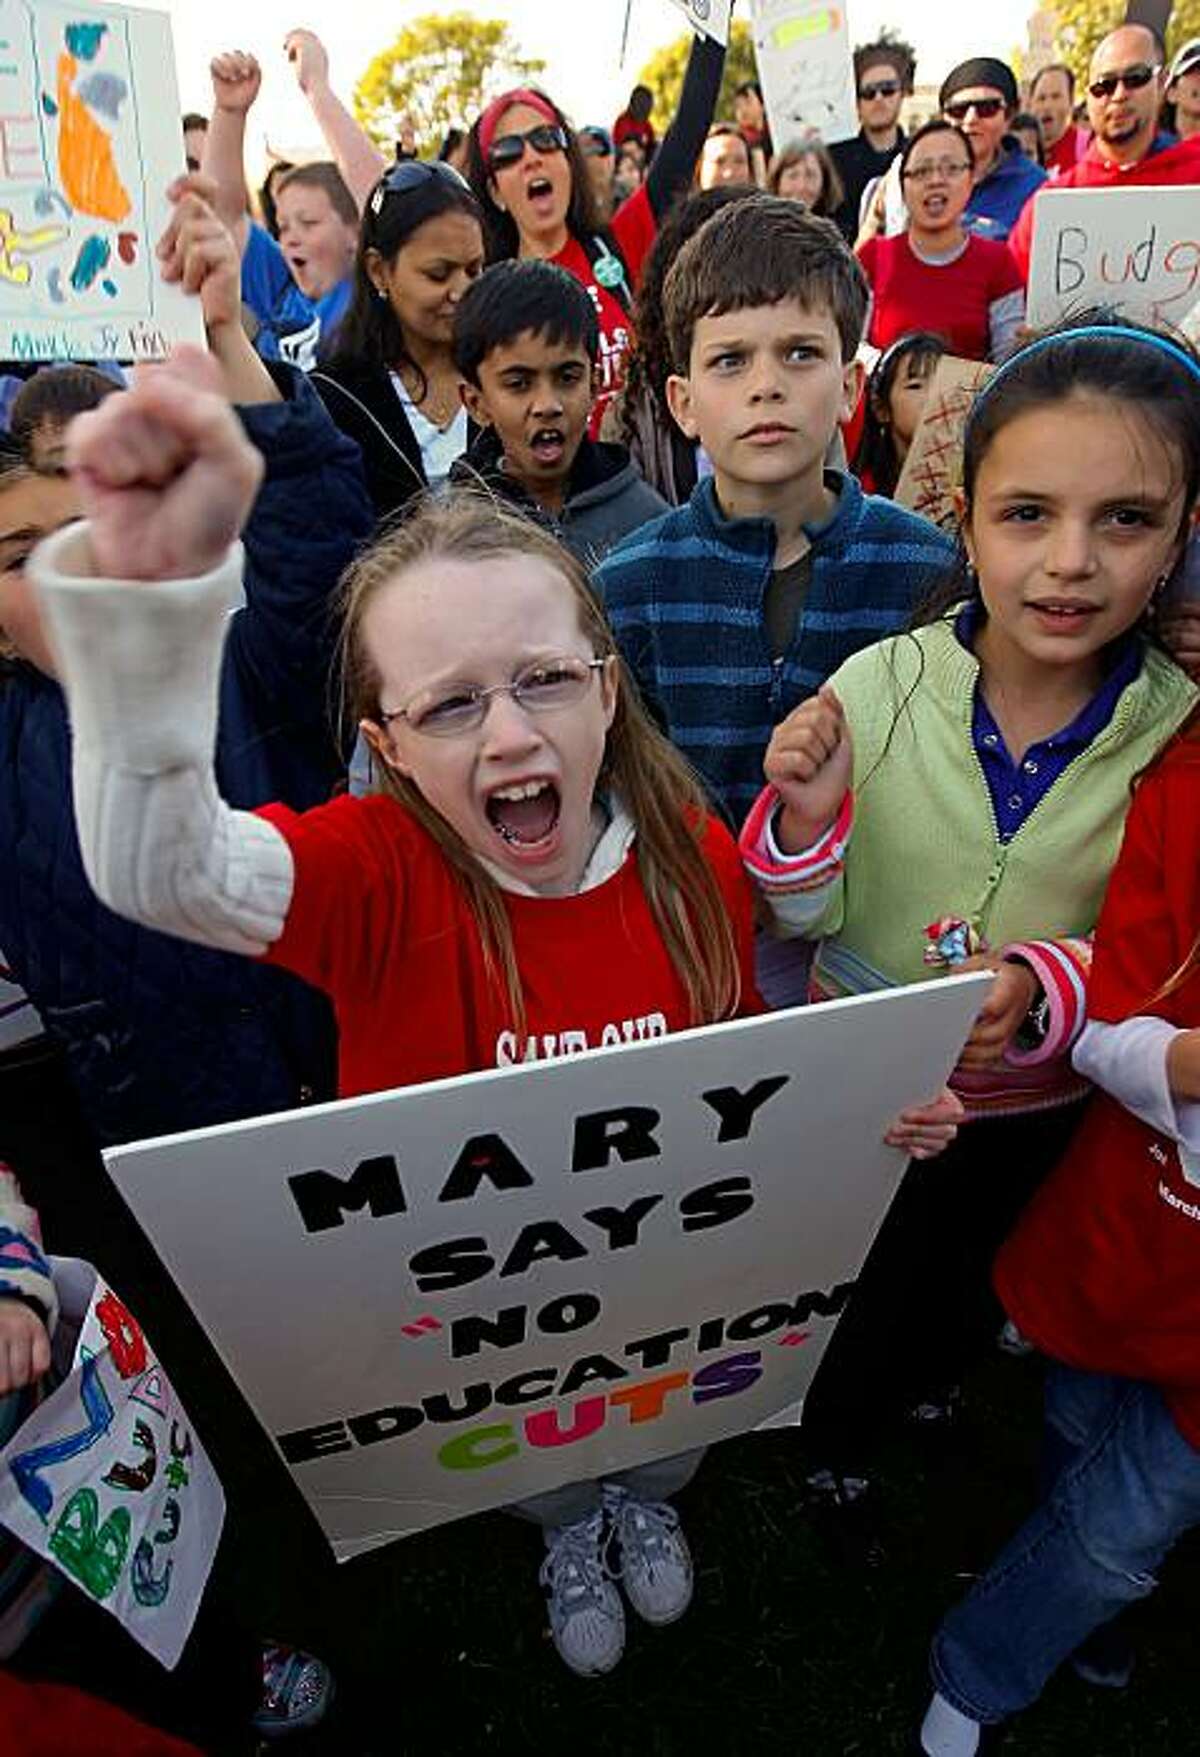 2nd grader, Mary Kyne of Diane Feinstein Elementary School in San Francisco, Ca., gathered with students, parents and teachers as they marched from school to Larsen Park for a rally. They joined several public schools in San Francisco for the Day of Action protest to defend the funding of public education on Thursday Mar. 4, 2010.